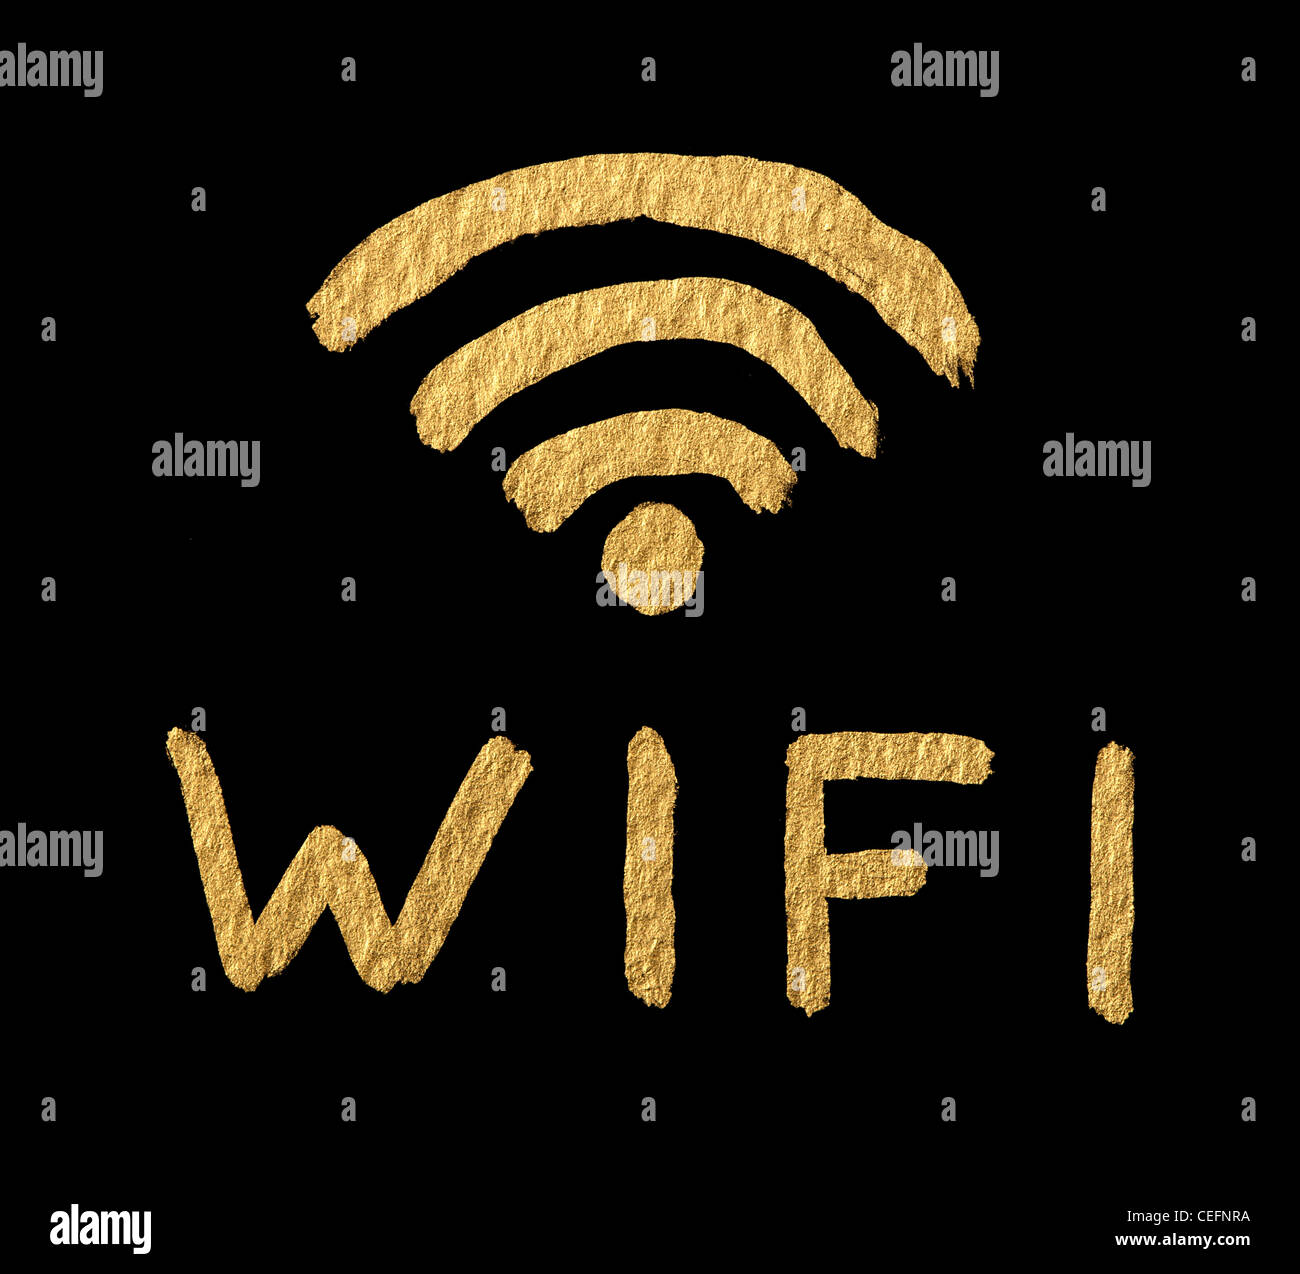 Word WIFI and symbol over black Stock Photo